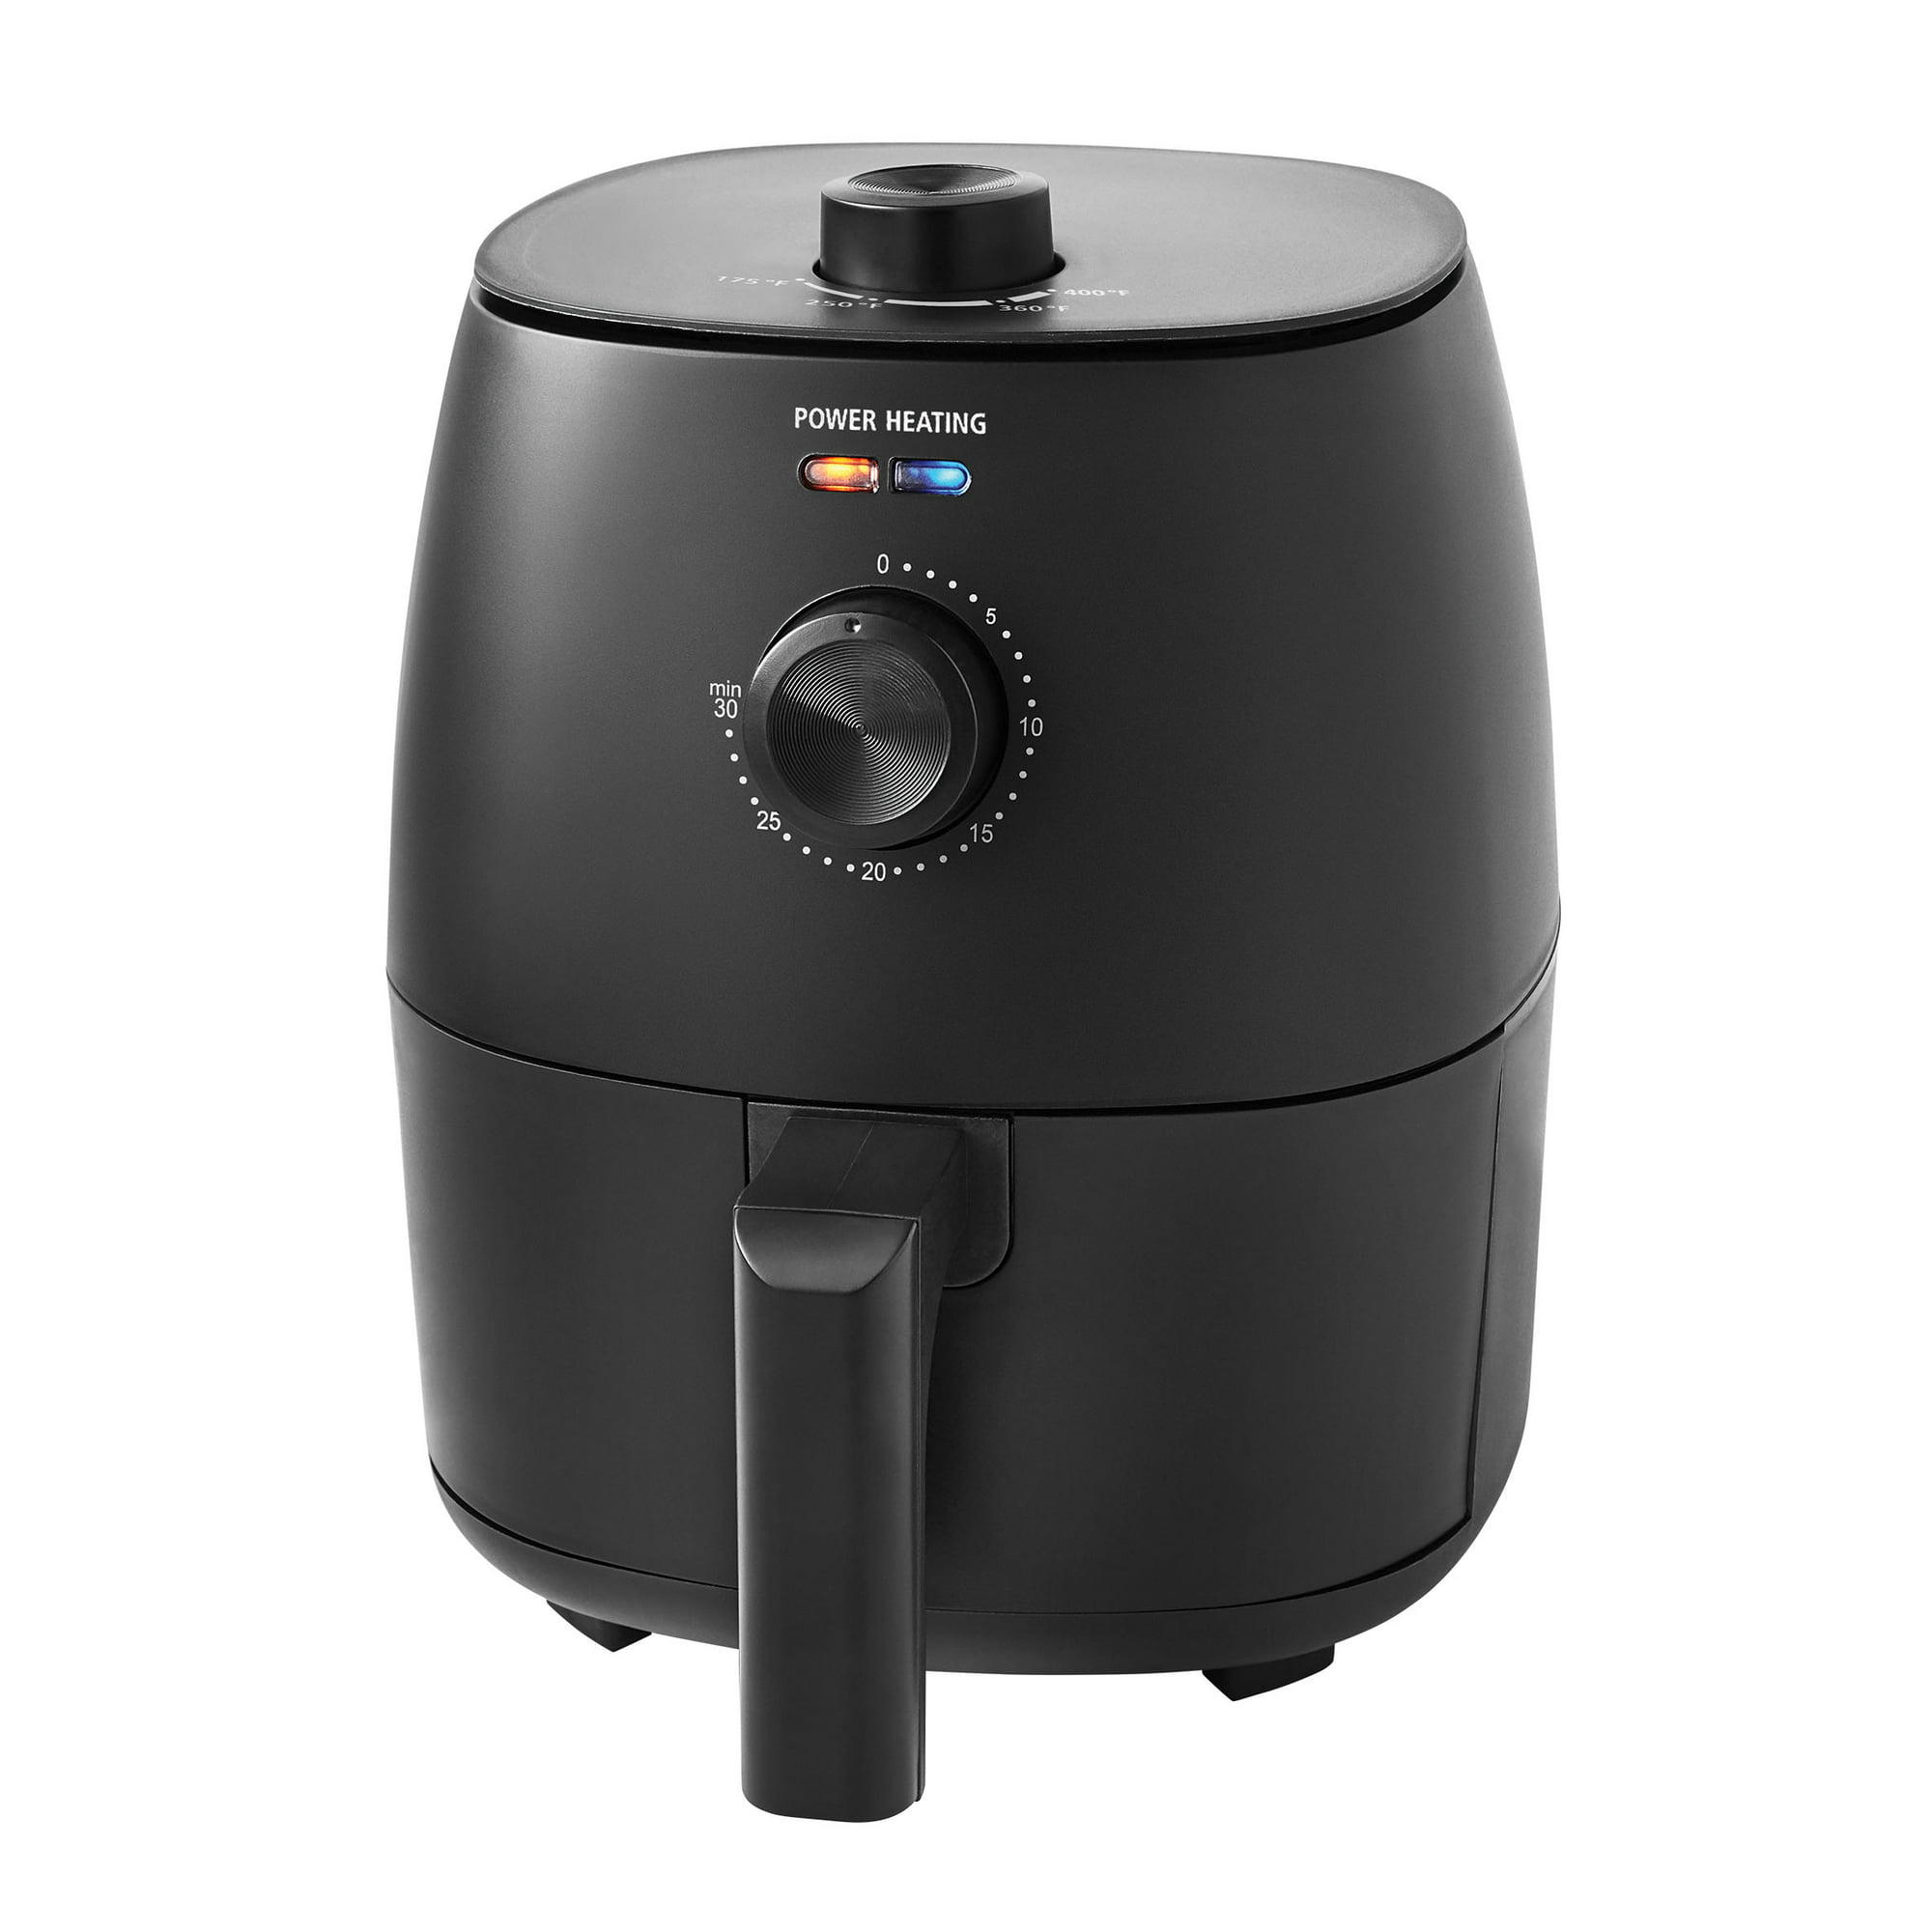 Walmart just put the Ninja Air Fryer on sale for a whopping $30 off